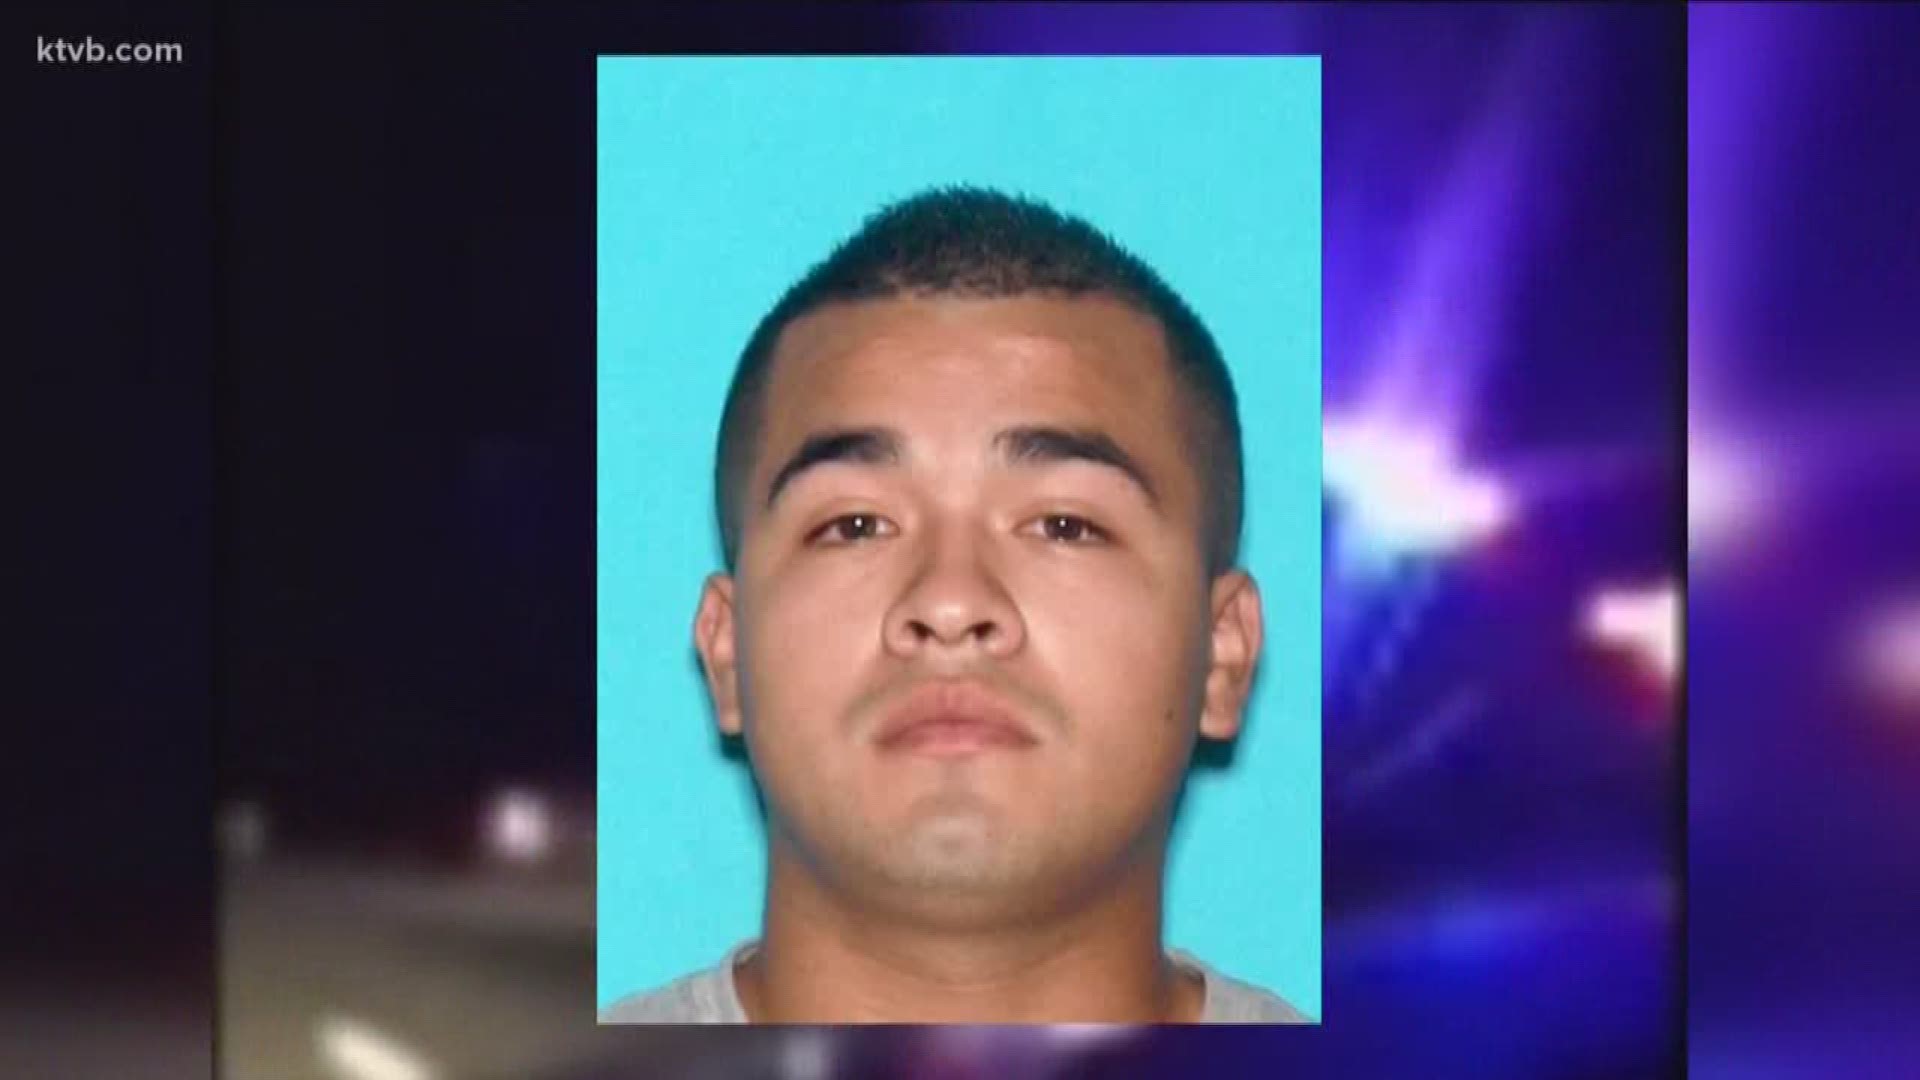 Jose Hernandez was arrested in Arizona. His three young children were found safe in his vehicle.